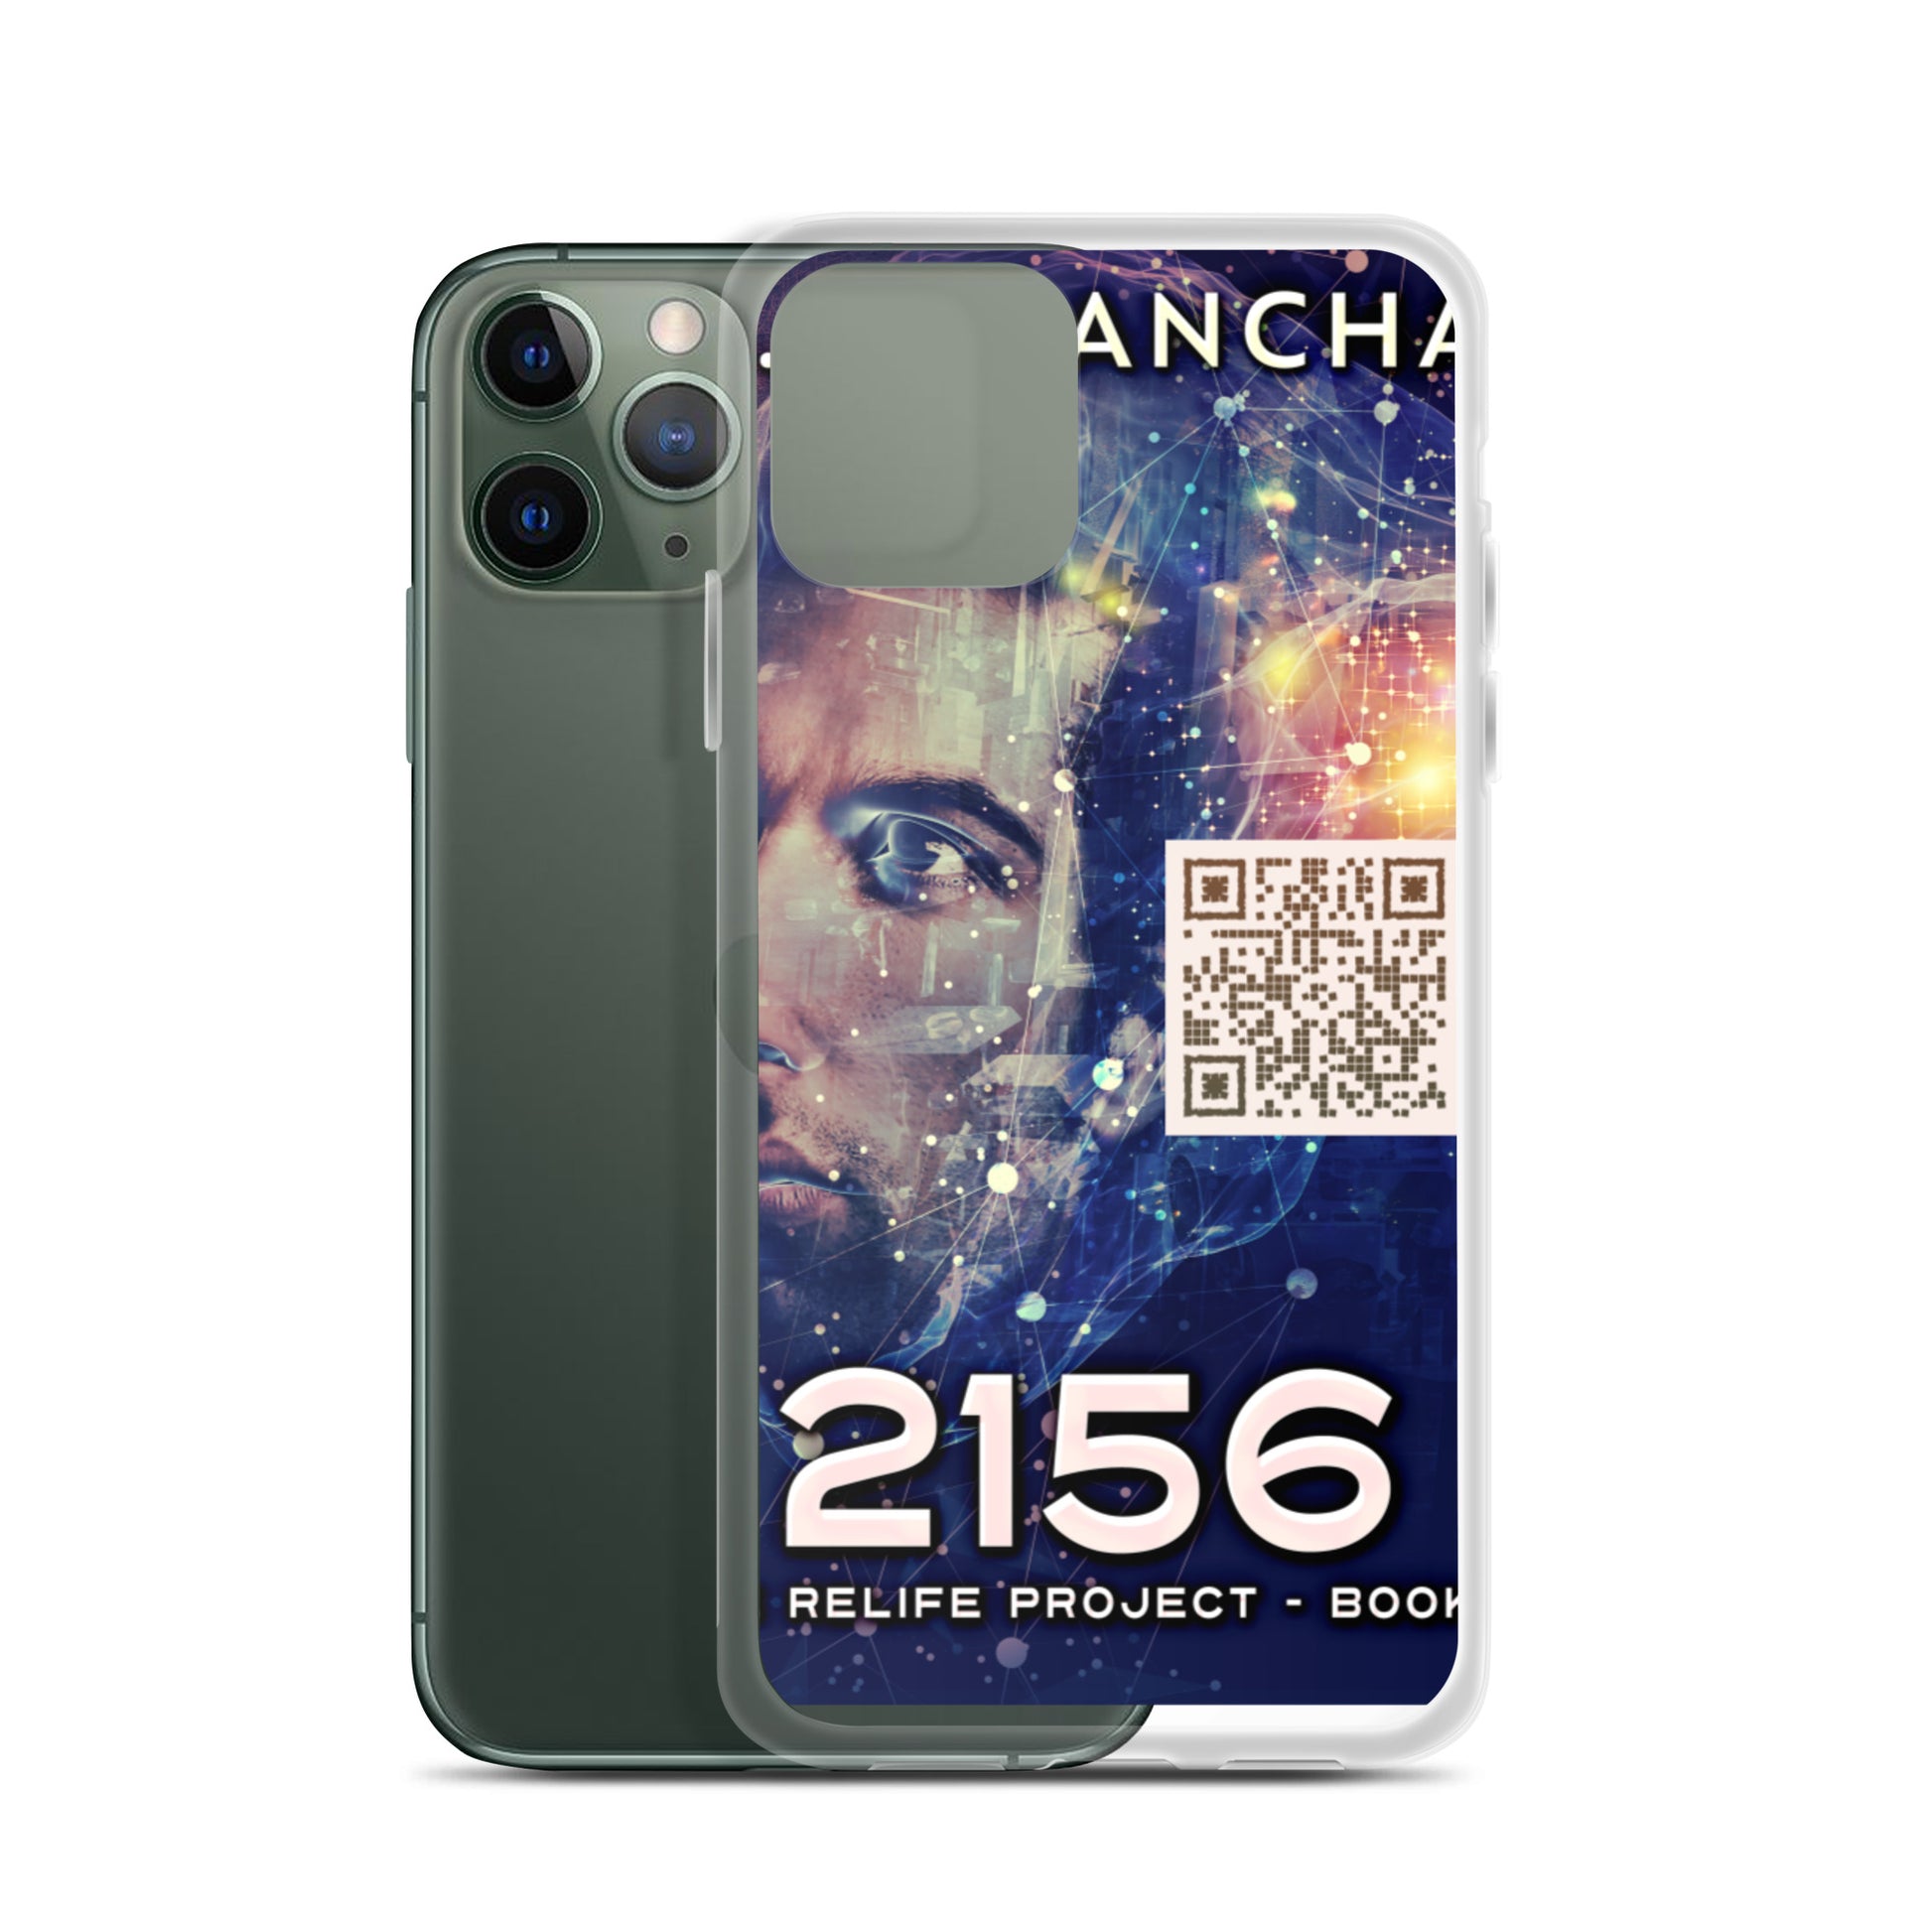 iphone case with cover of C.M. Dancha’s book 2156